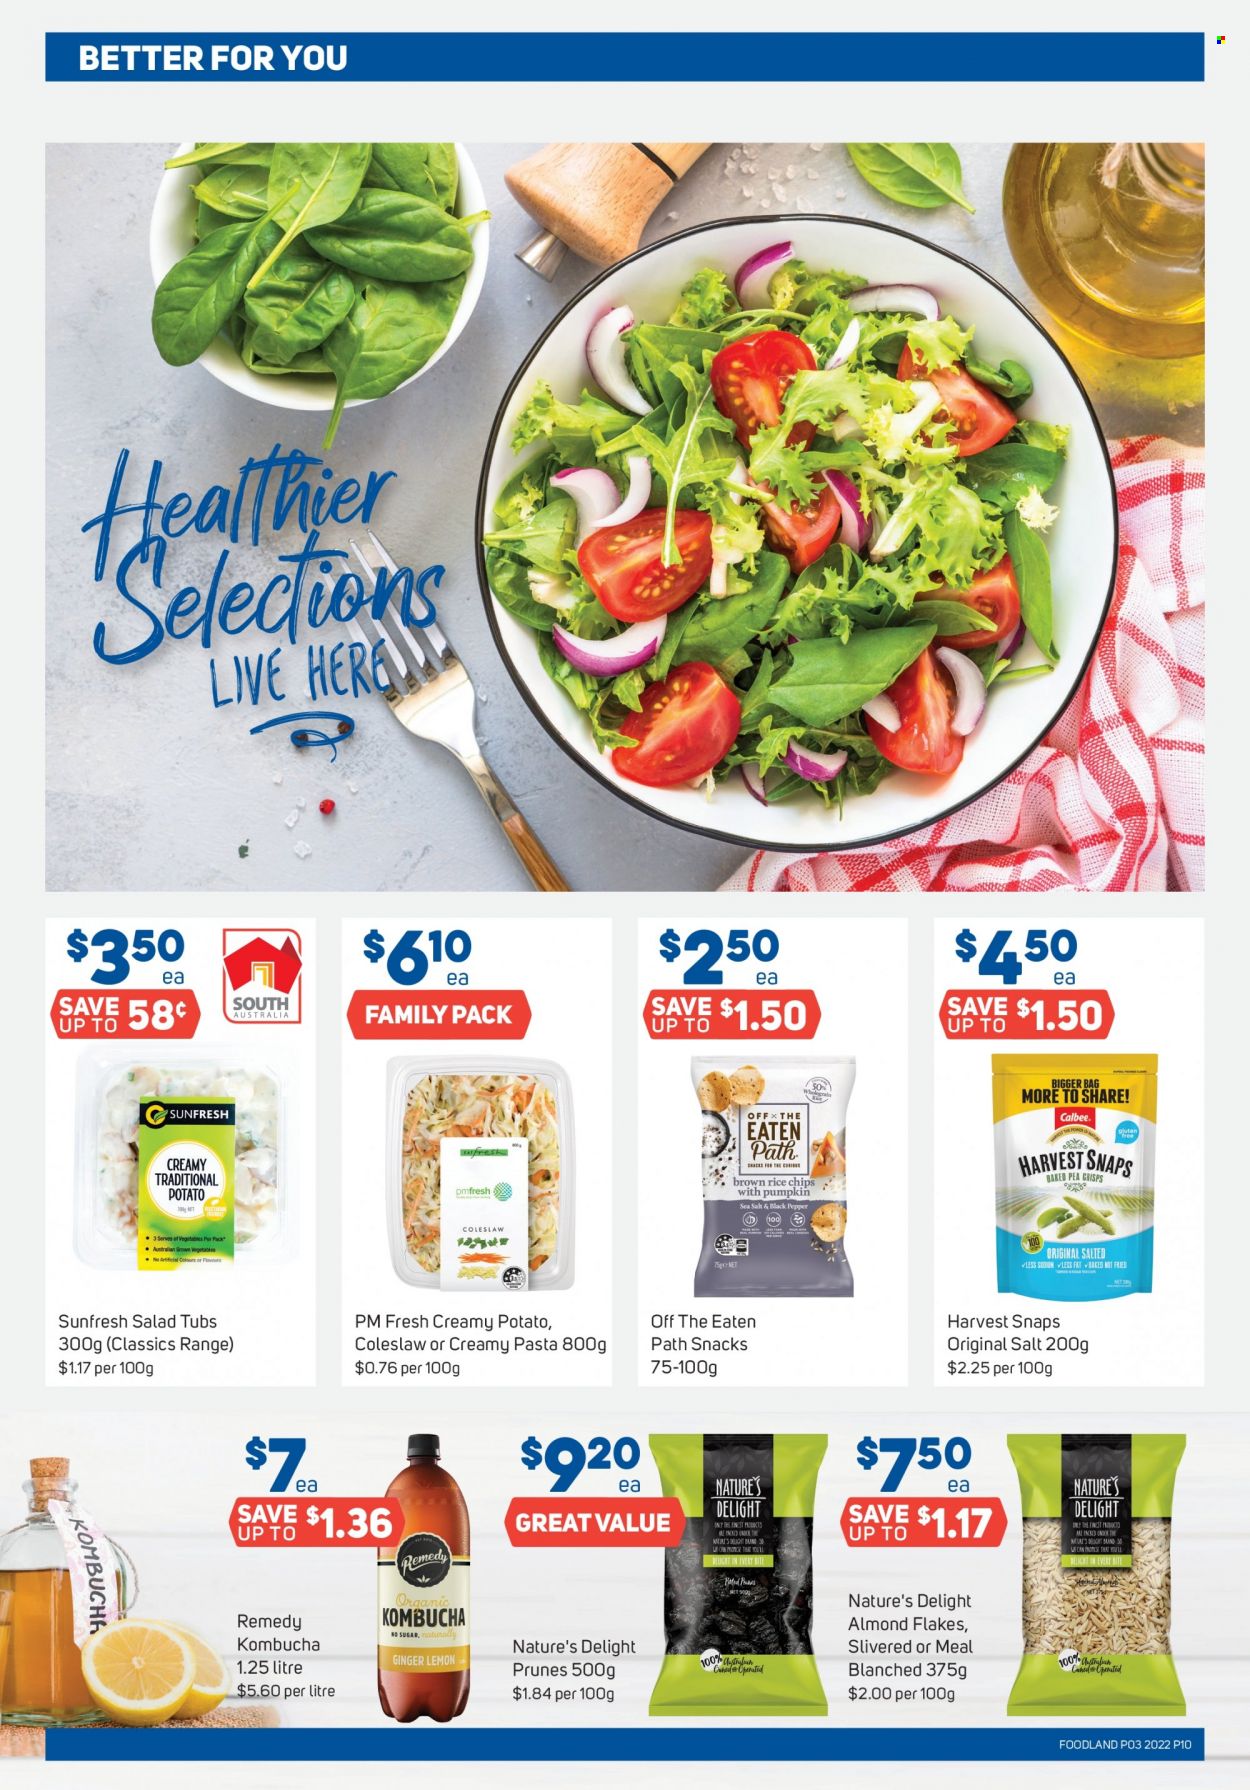 thumbnail - Foodland Catalogue - 19 Jan 2022 - 25 Jan 2022 - Sales products - ginger, coleslaw, snack, chips, Harvest Snaps, brown rice, rice, whole grain rice, black pepper, prunes, dried fruit, kombucha. Page 10.